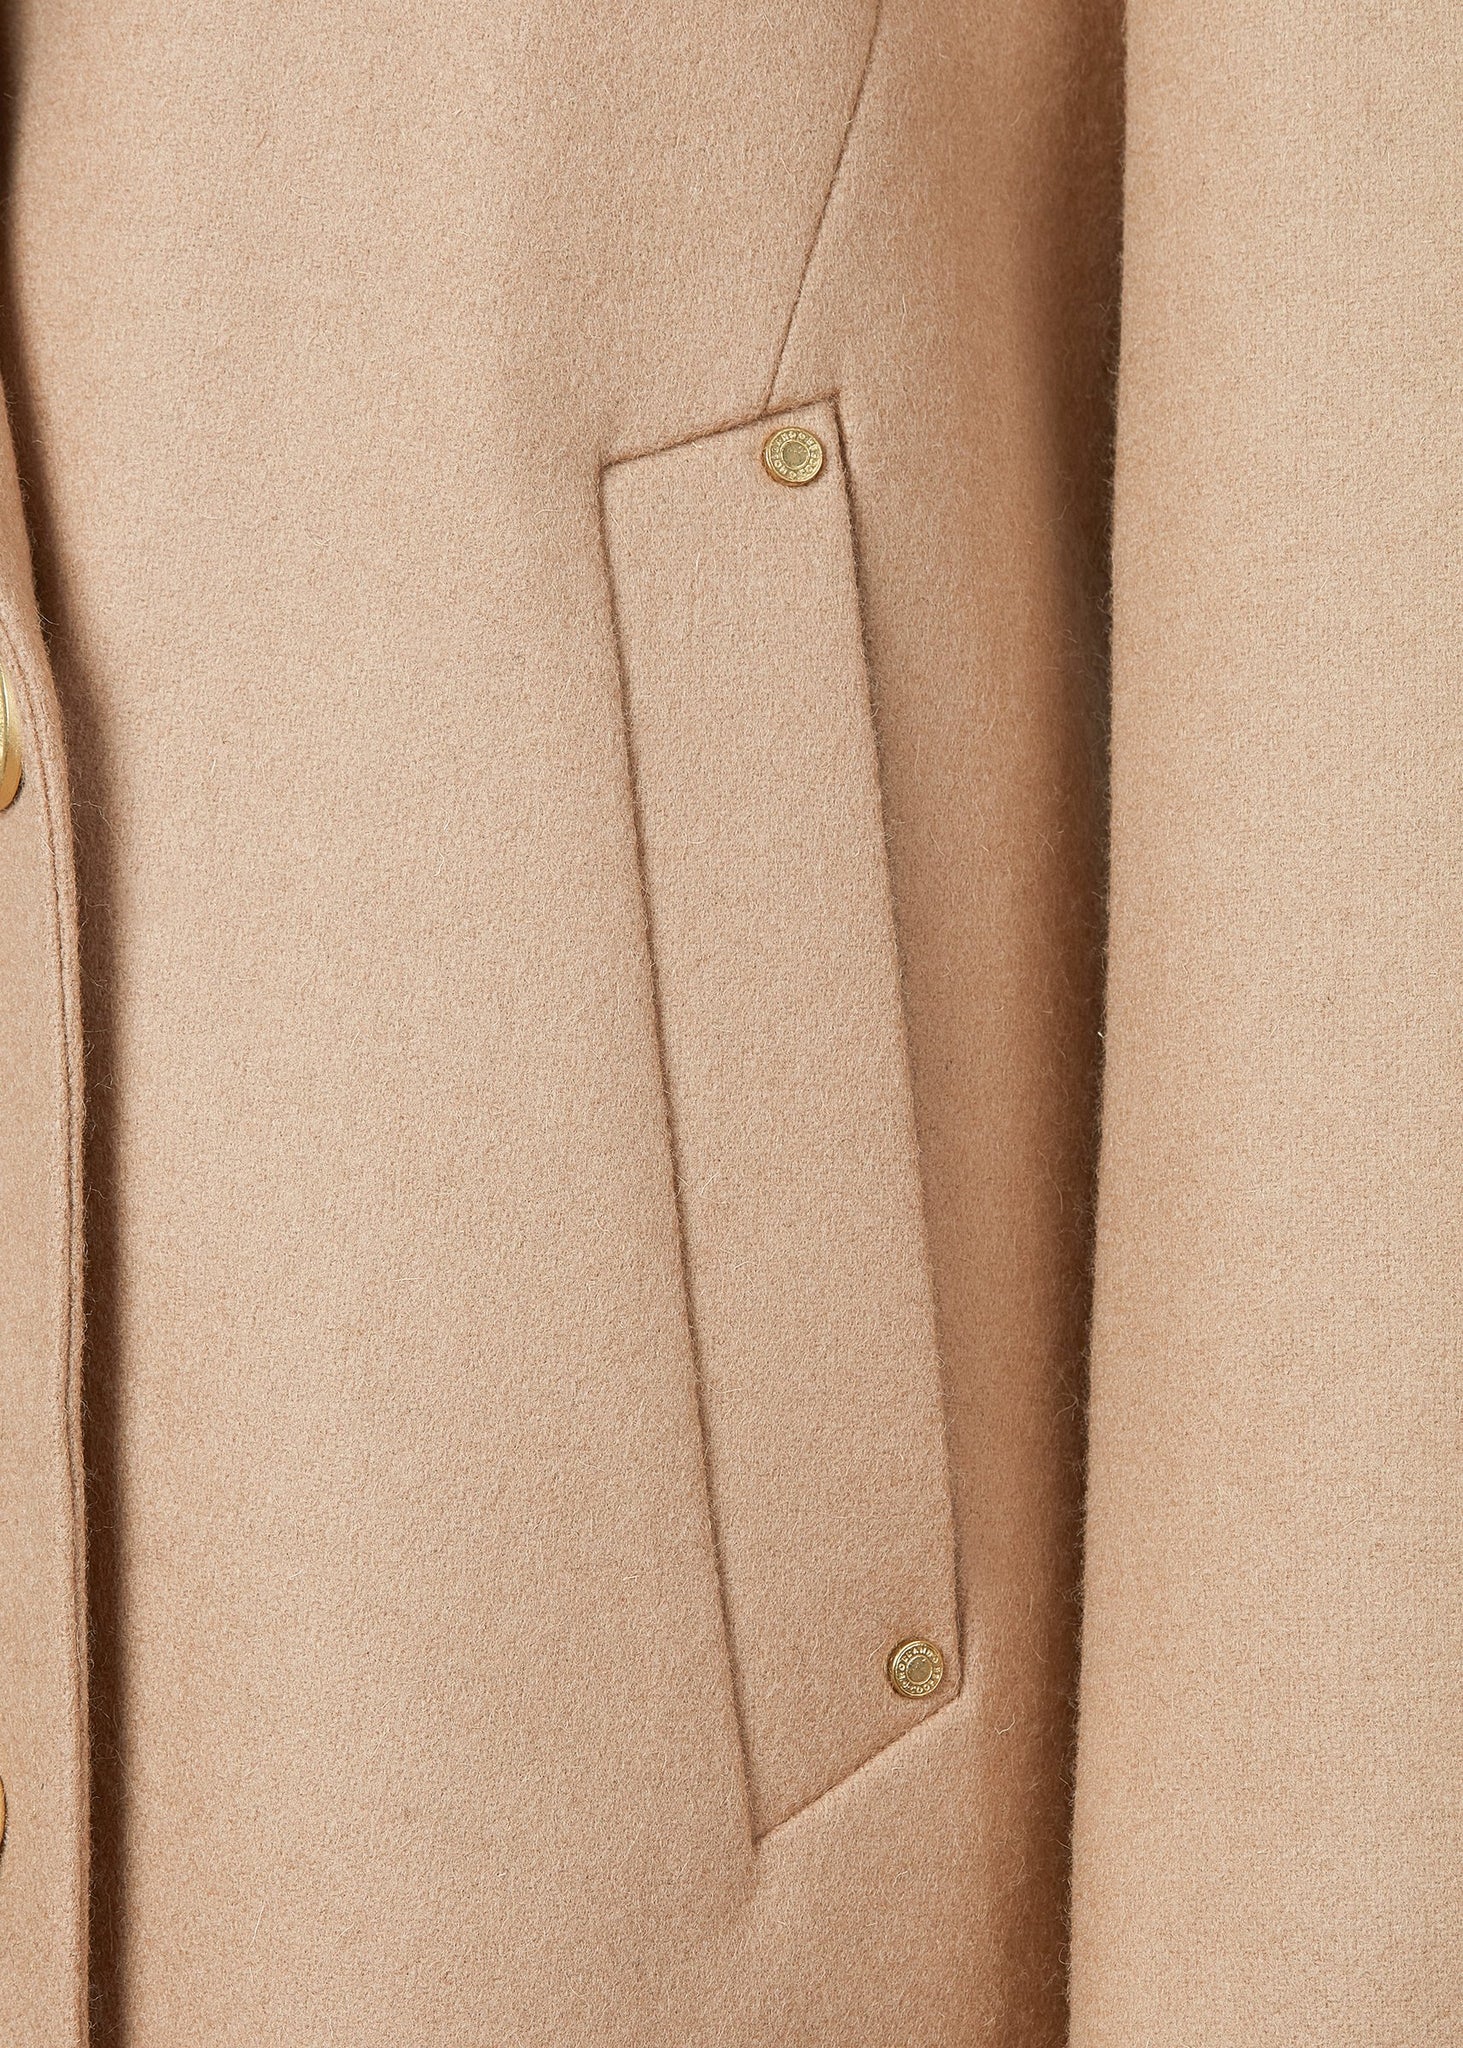 pocket detail of Womens camel wool double breasted mid-length tweed coat 